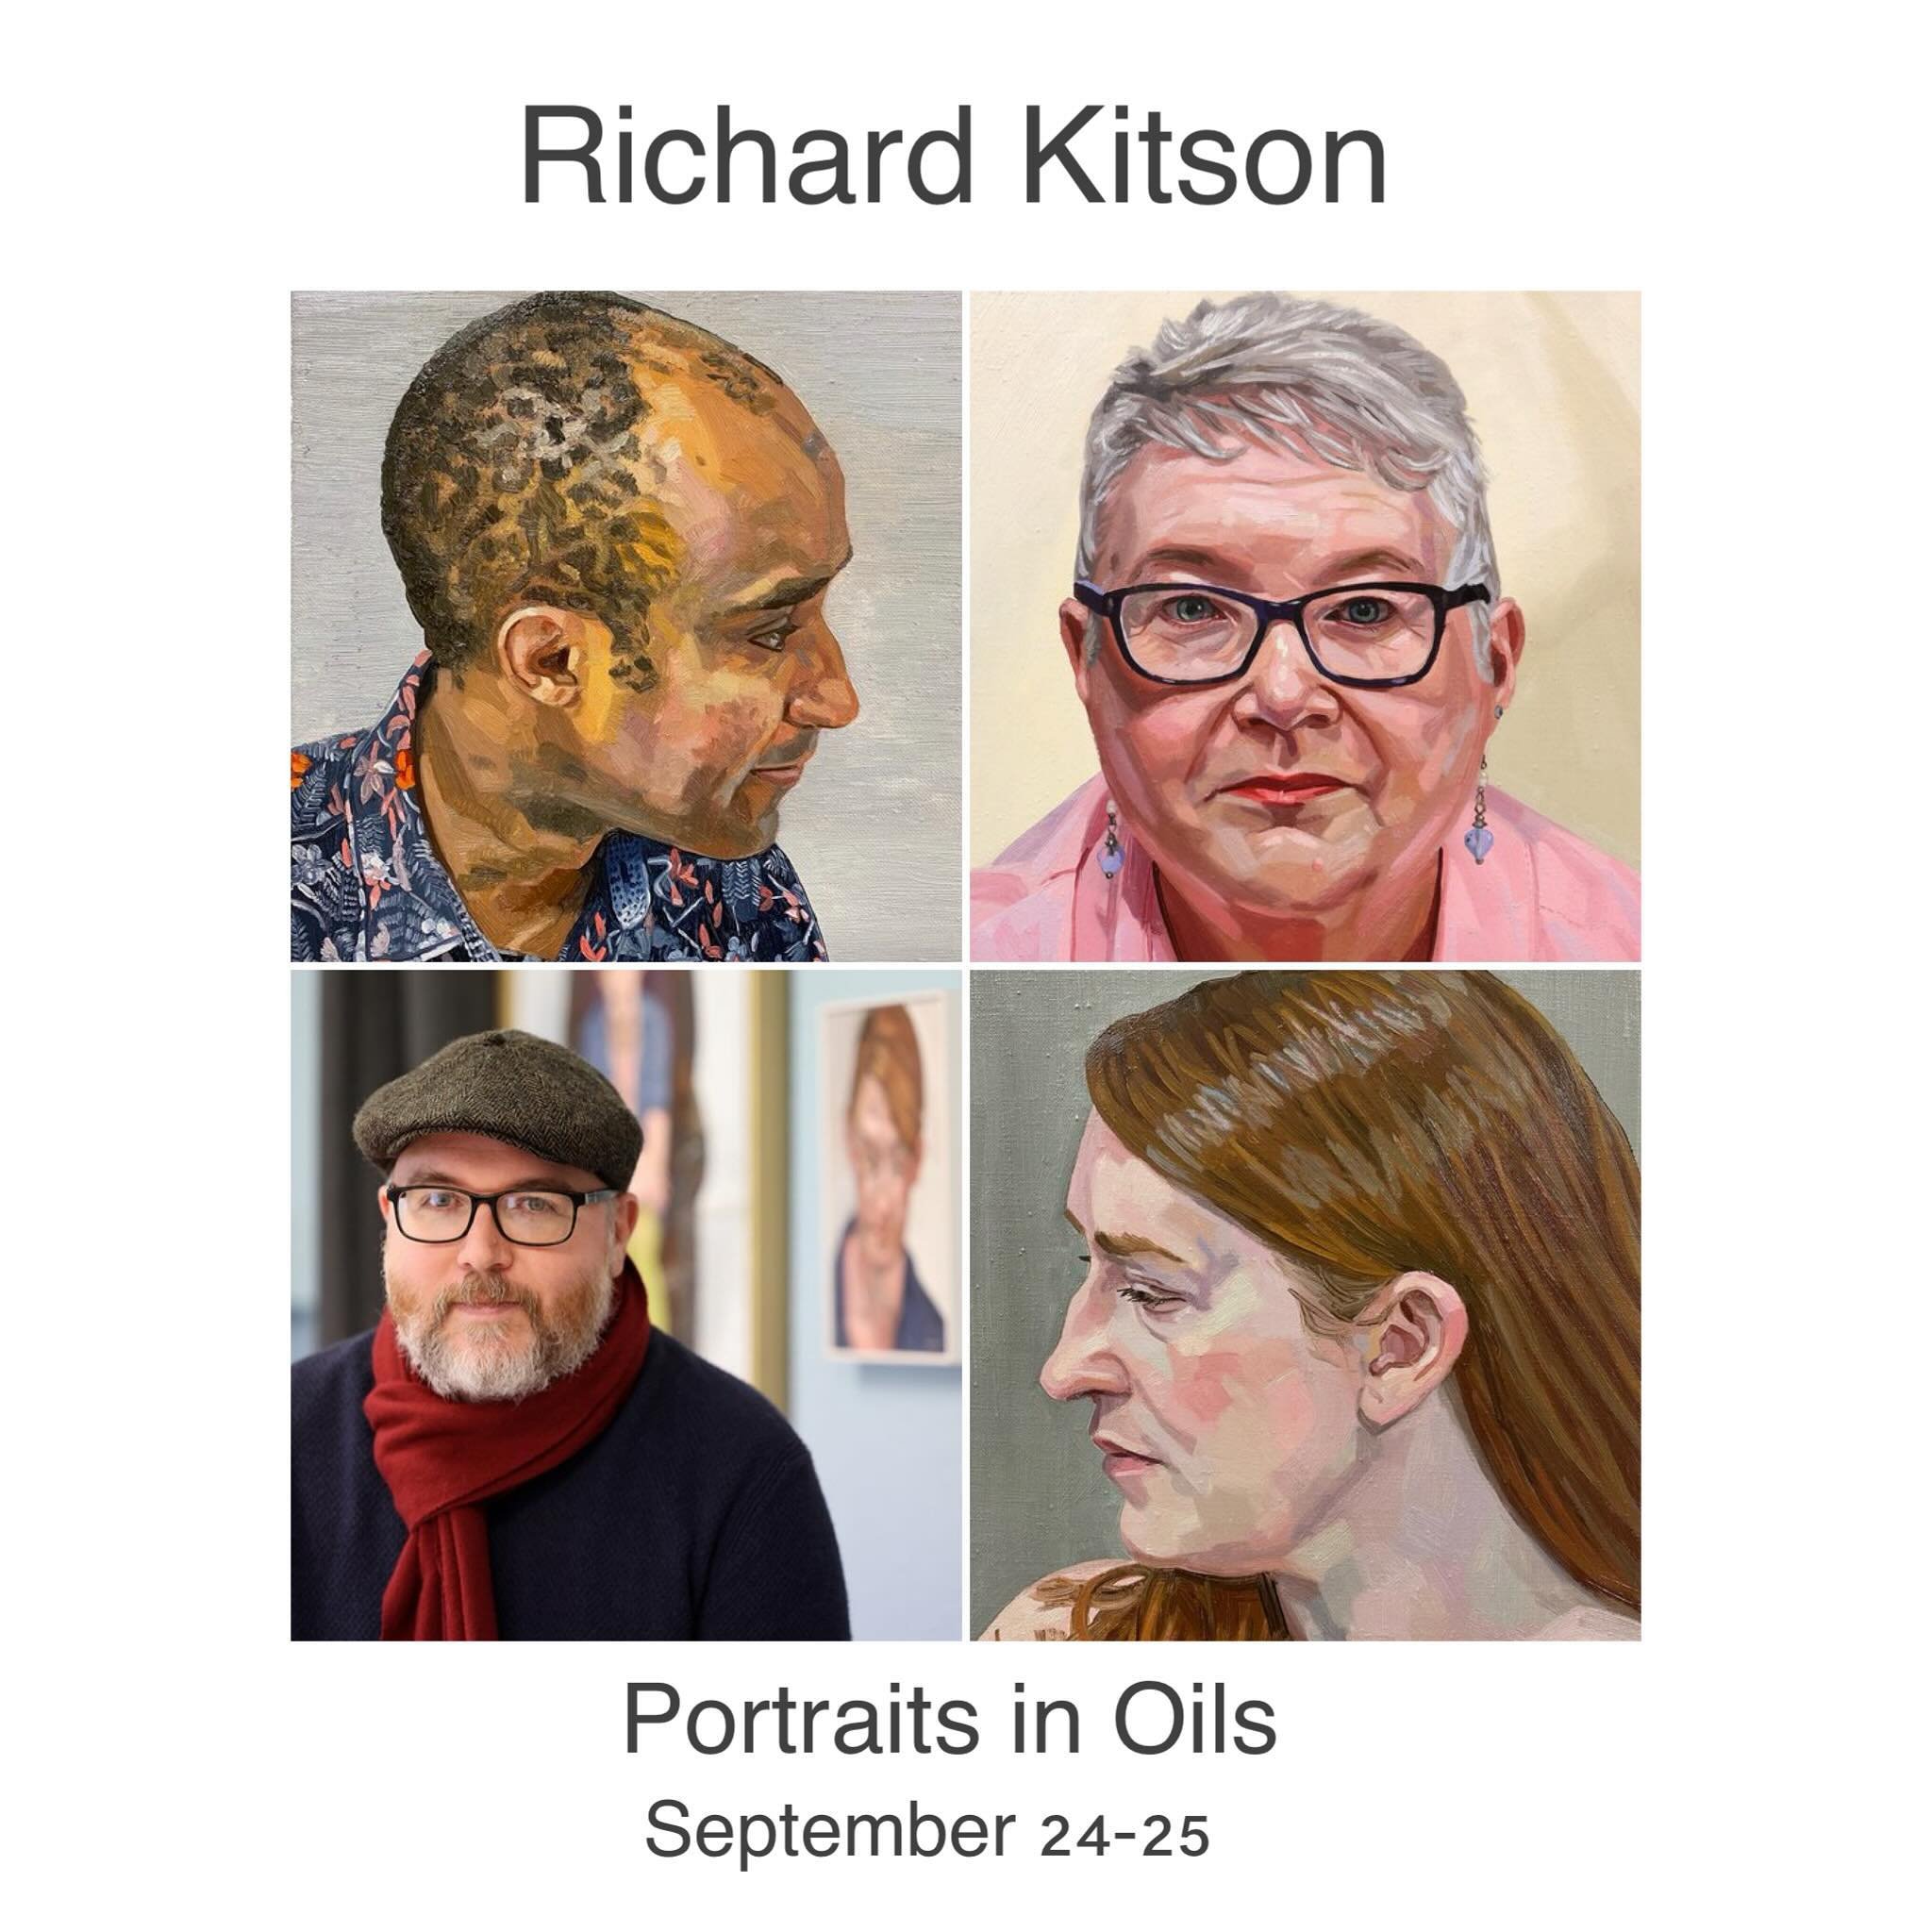 We&rsquo;re thrilled to welcome Richard Kitson to The Lund this September for an exciting two day workshop dedicated to portrait painting in oils!

You will learn how to capture a likeness using a range of painting techniques which can be refined int